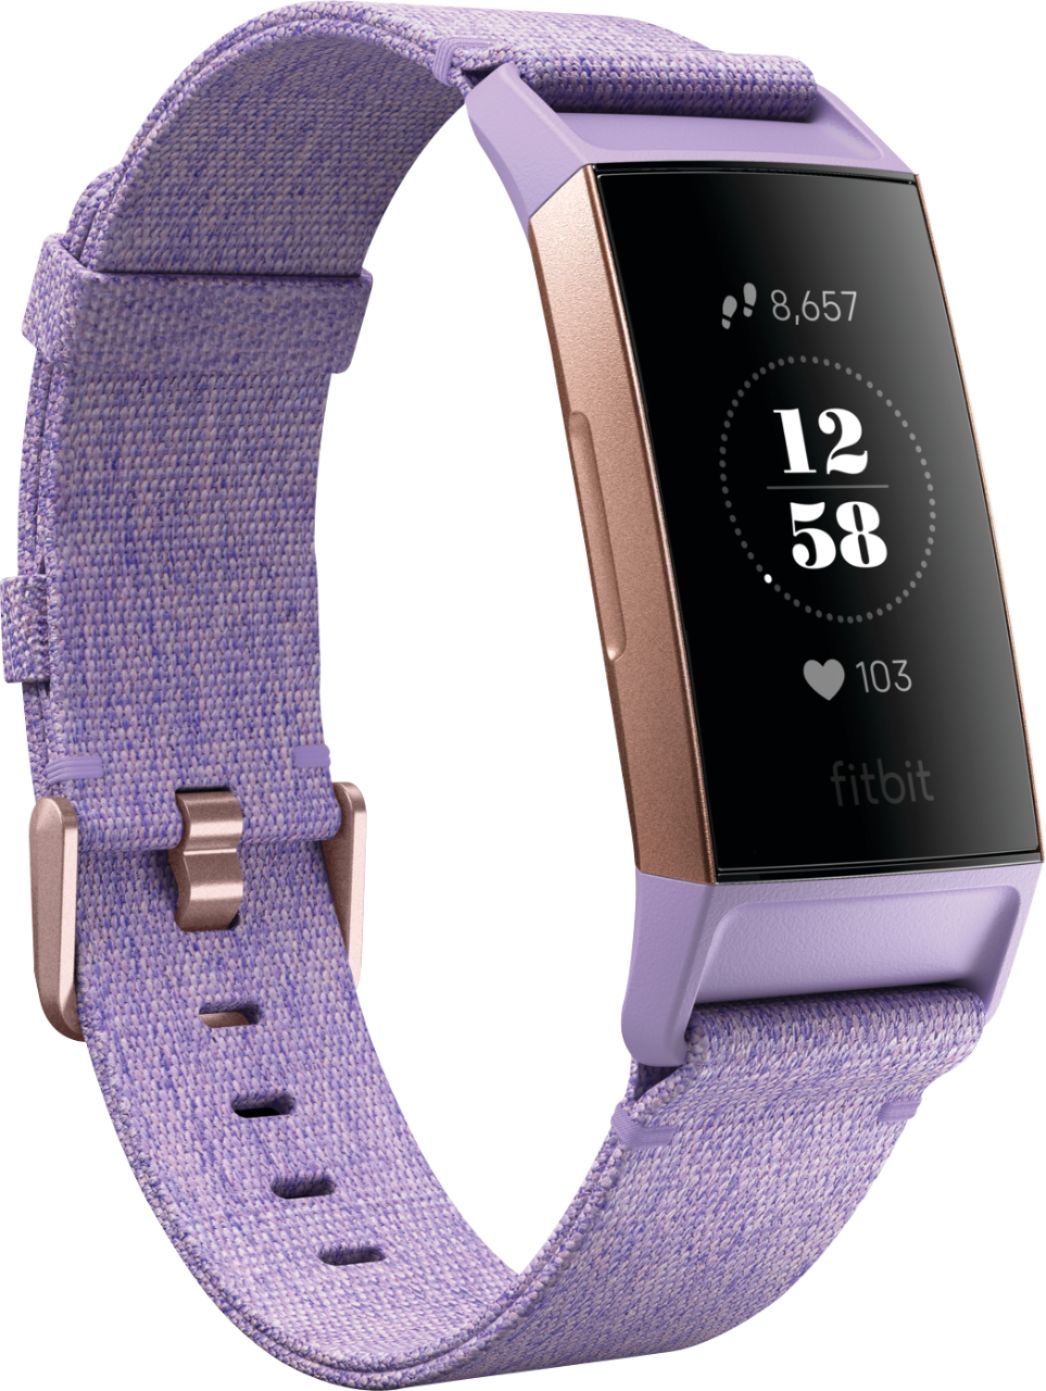 Fitness Wristband Fitbit Charge 2 Series Heart Rate Lavender Rose Gold/Small 